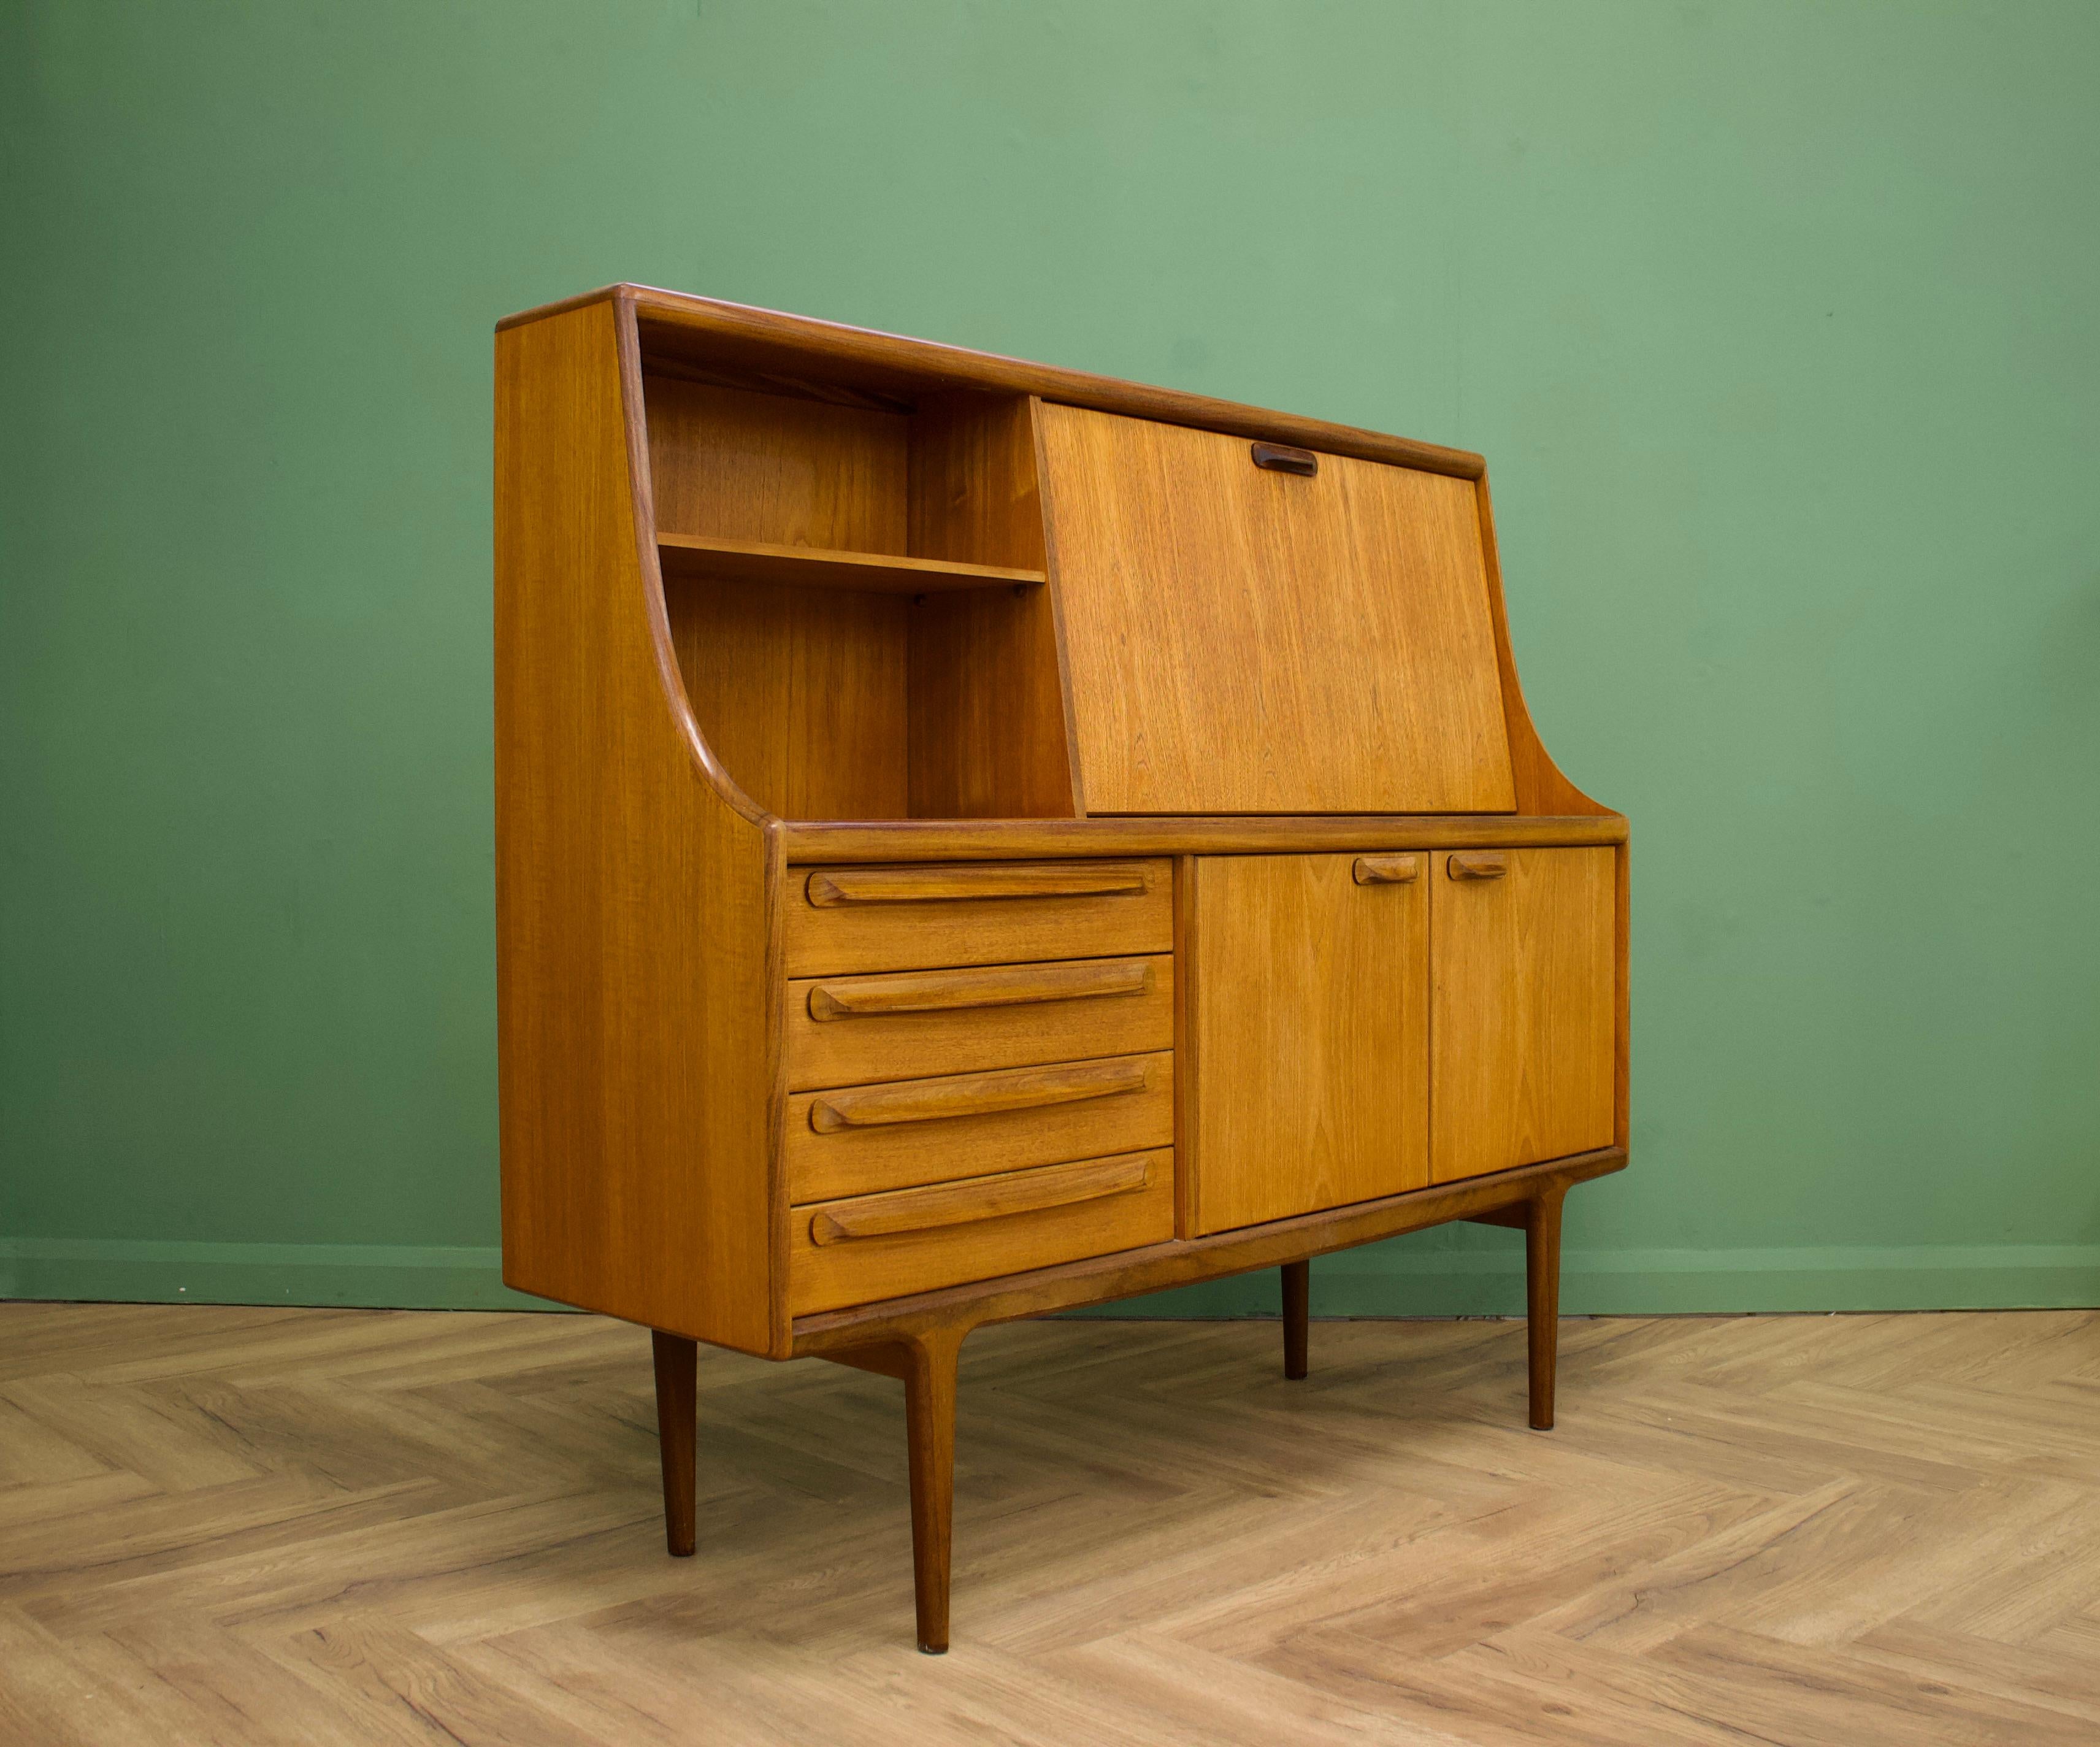 British Teak Sideboard or Highboard from Younger, 1960s